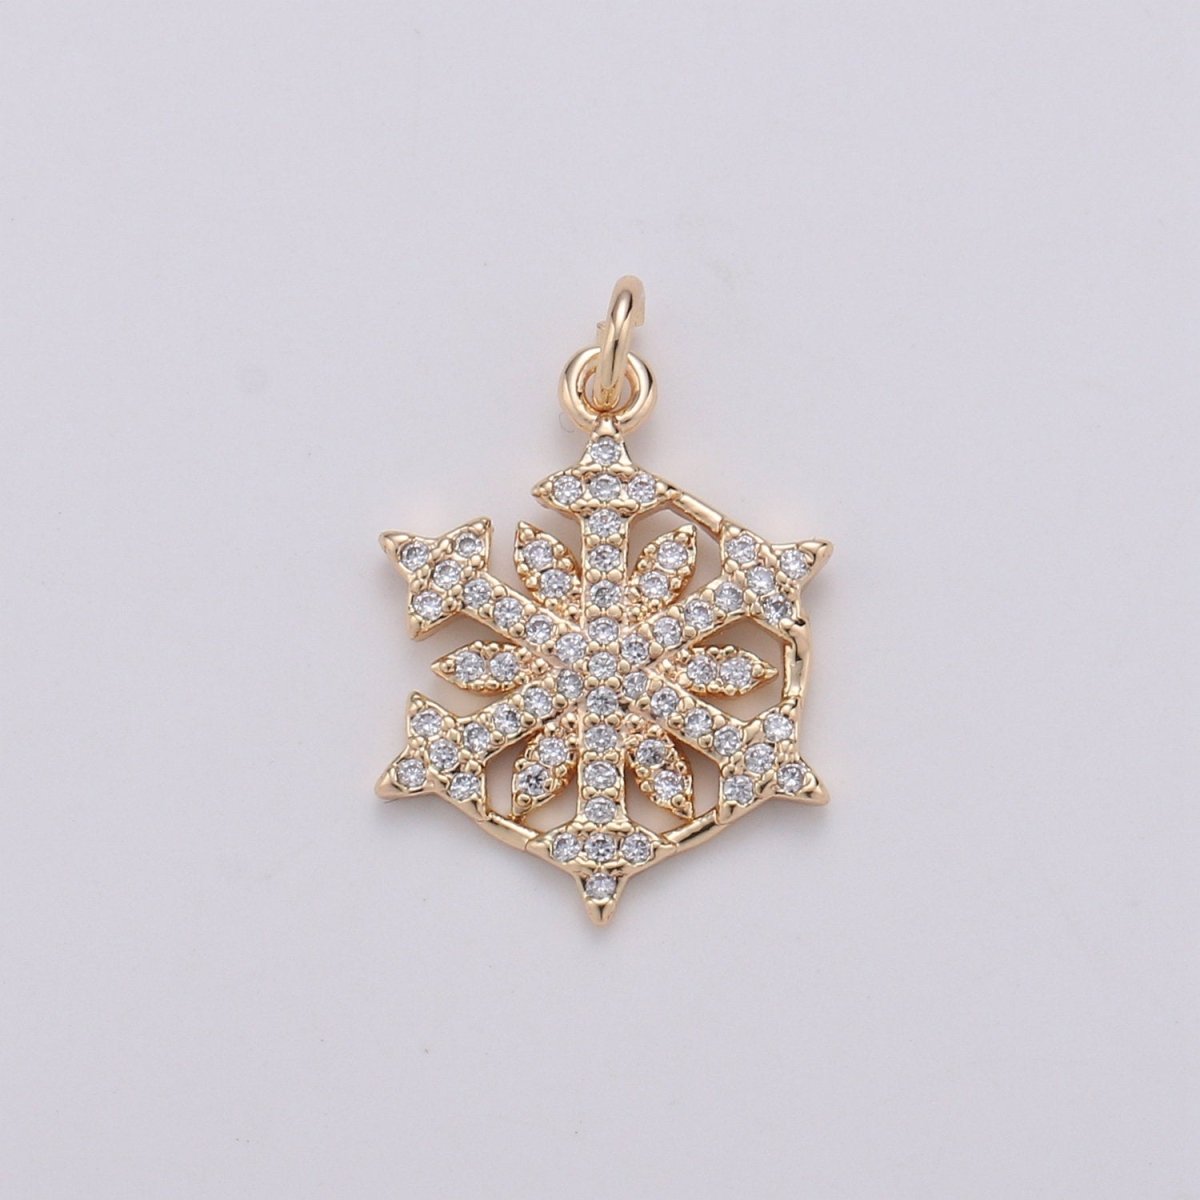 24K Gold Filled Snow Flake Charm Micro Pave Snow Charm, Northstar Cubic Charms, CZ Gold ClearCharm, Dainty Minimalist Jewelry Supply D-741 - DLUXCA